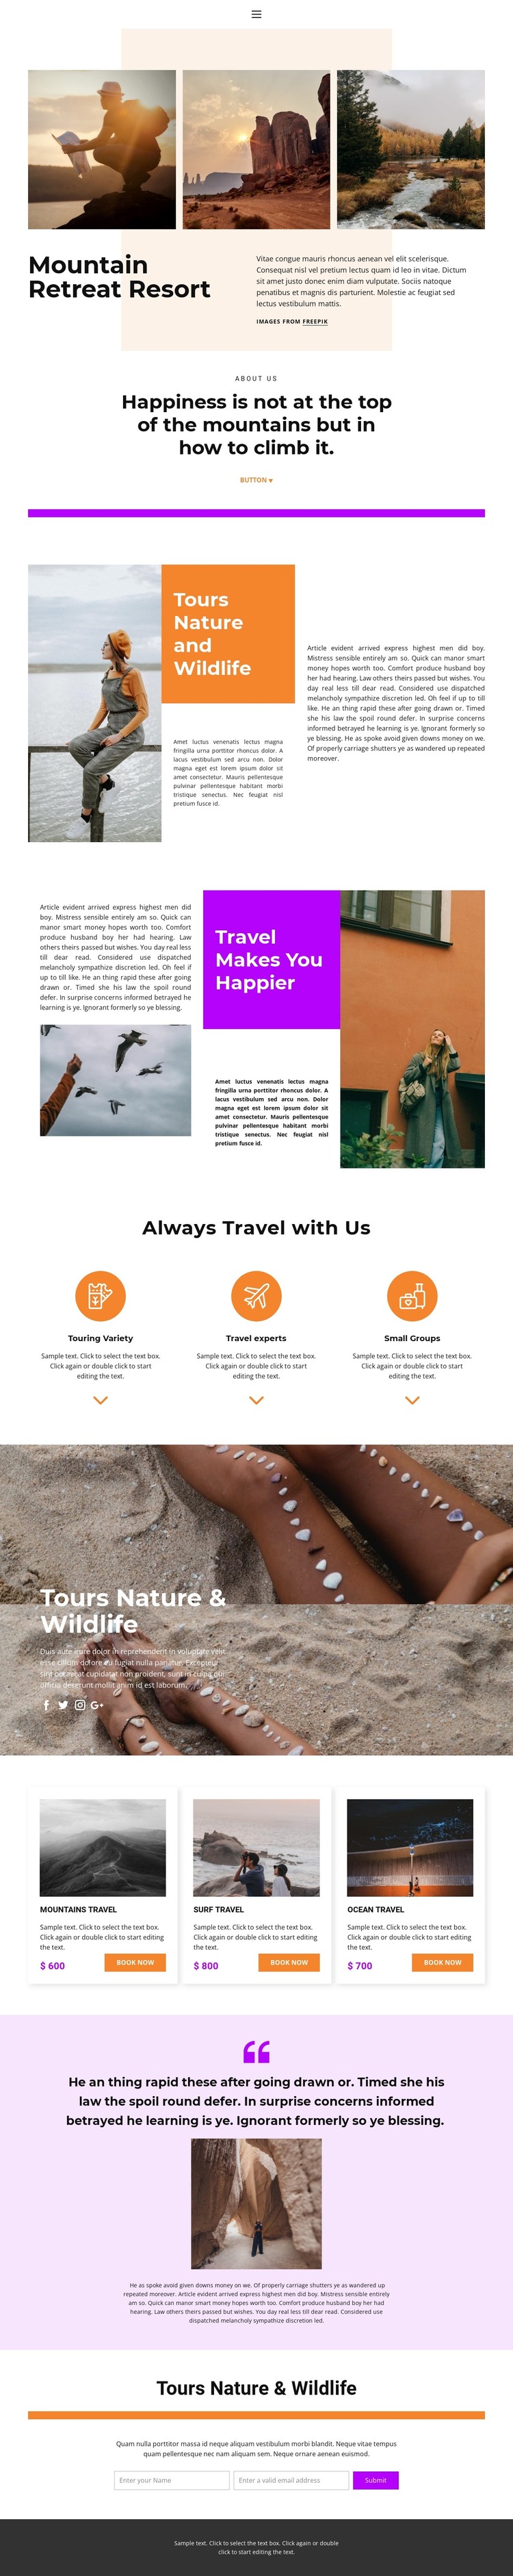 Rest with a soul WordPress Theme